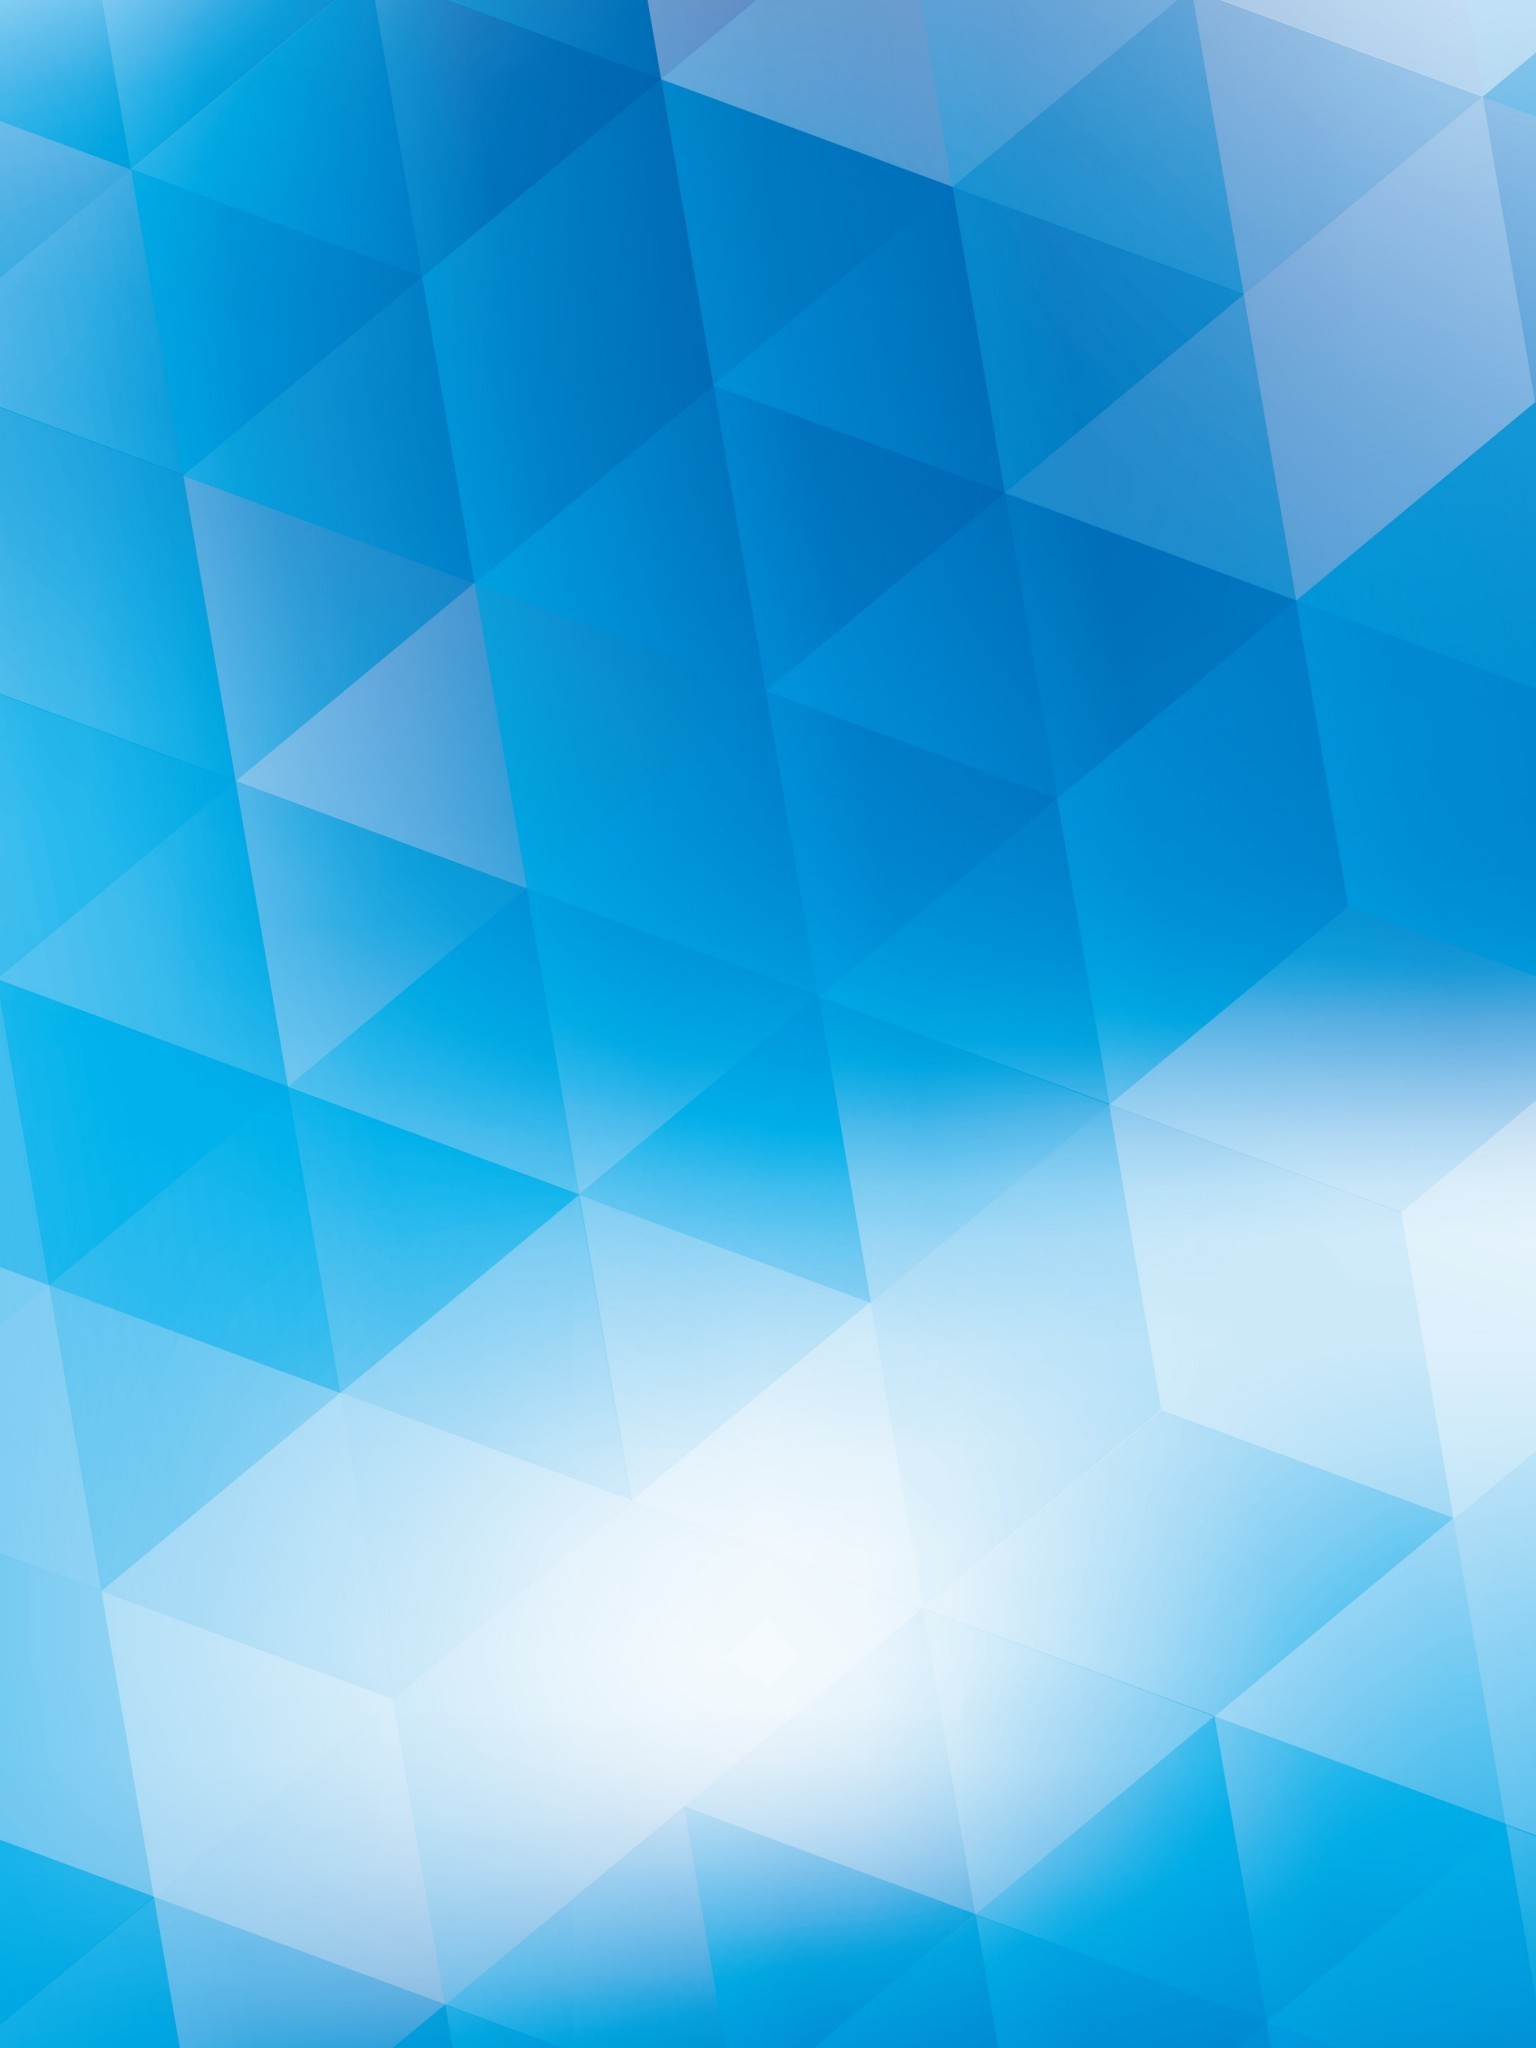 Blue Triangles, Geometry - Abstract Gradient Blue - HD Wallpaper 